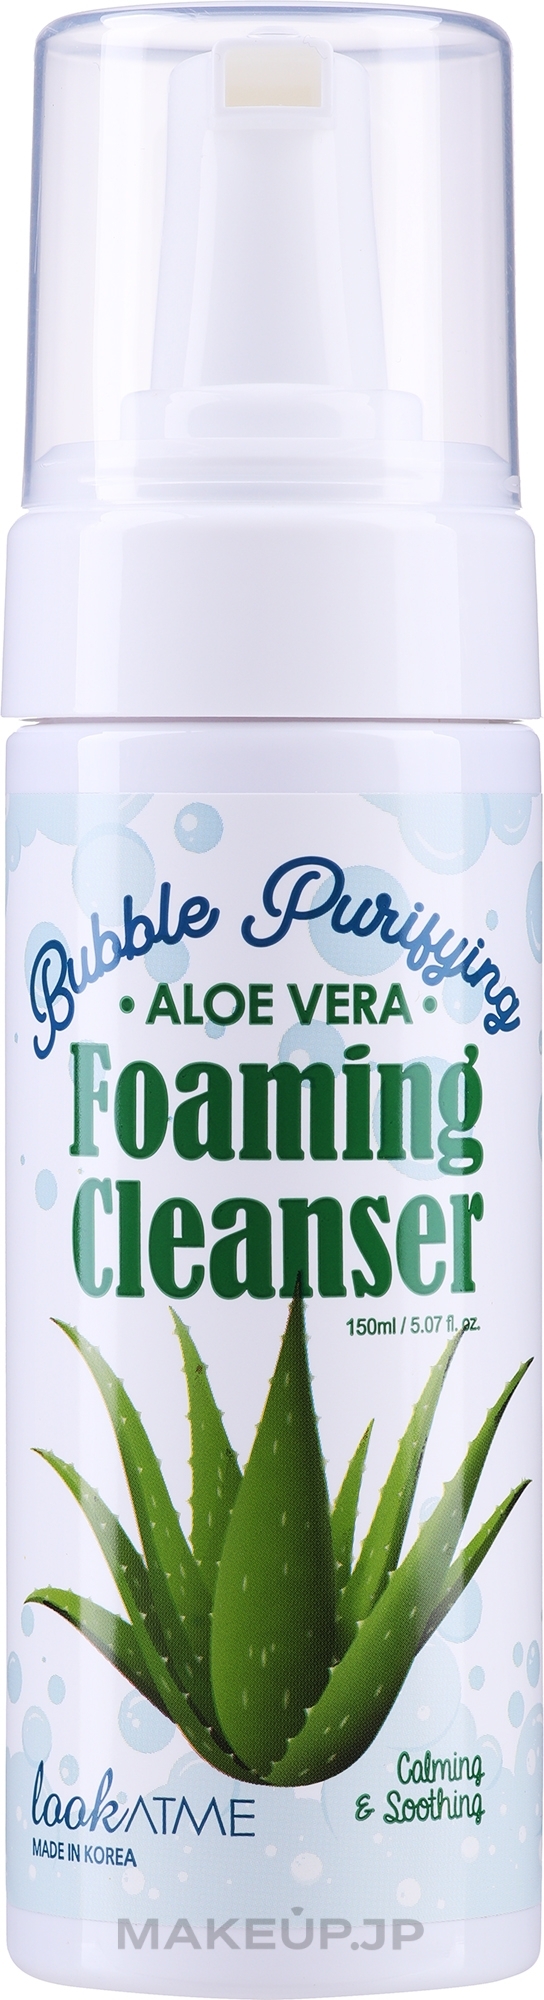 Face Cleansing Foam with Aloe Vera Extract - Look At Me Bubble Purifying Foaming Facial Cleanser Aloe Vera — photo 150 ml